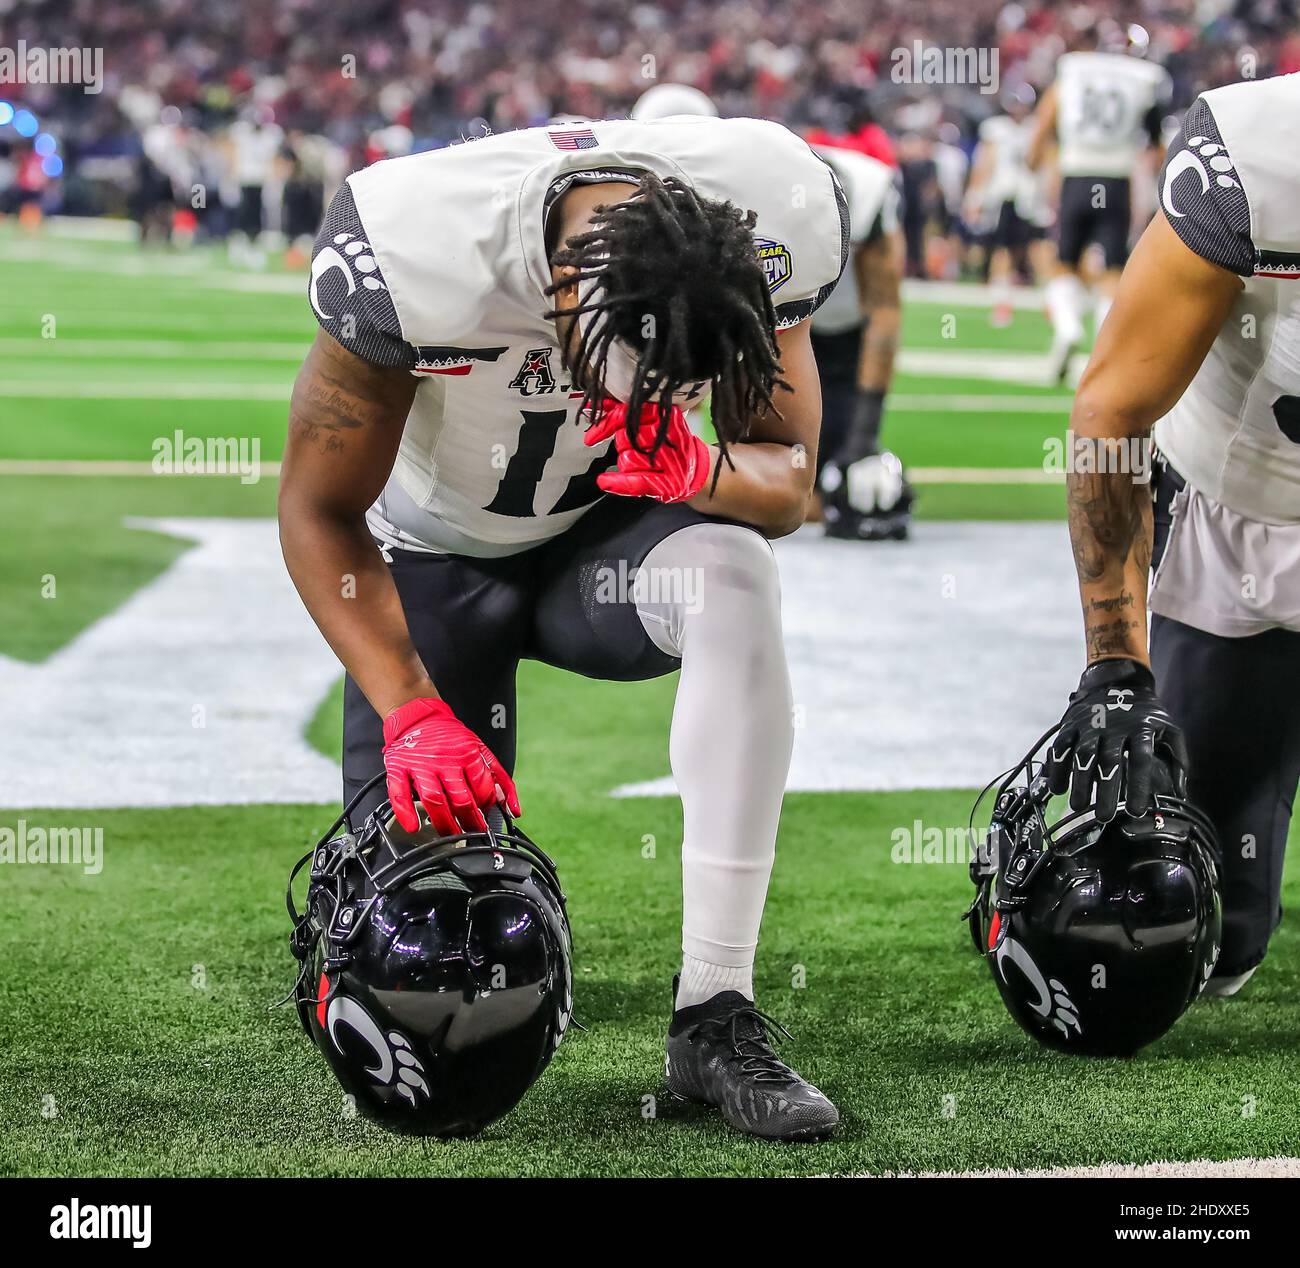 December 31, 2021: Cincinnati Bearcats wide receiver Alec Pierce (12) kneels before the Cotton Bowl Classic NCAA Football game between the University of Cincinnati Bearcats and the University of Alabama Crimson Tide at AT&T Stadium in Arlington, Texas. Tom Sooter/Dave Campbells Texas Football via CSM. Stock Photo